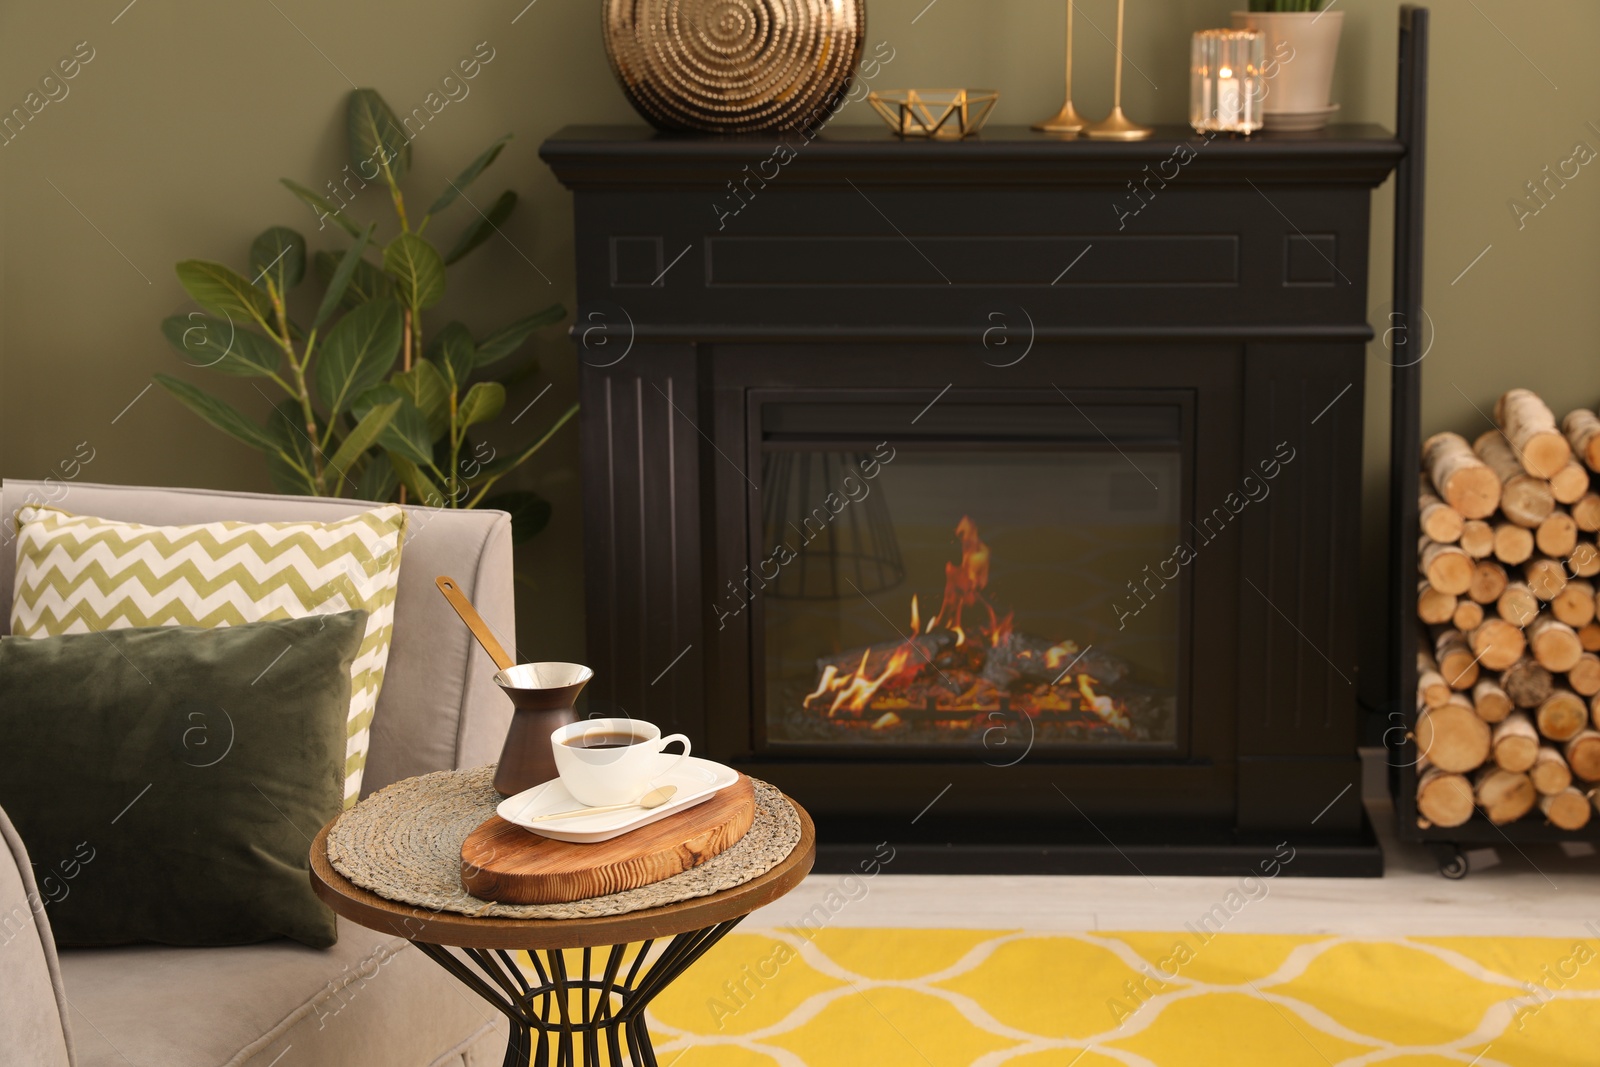 Photo of Cup of coffee and cezve on table near fireplace in living room